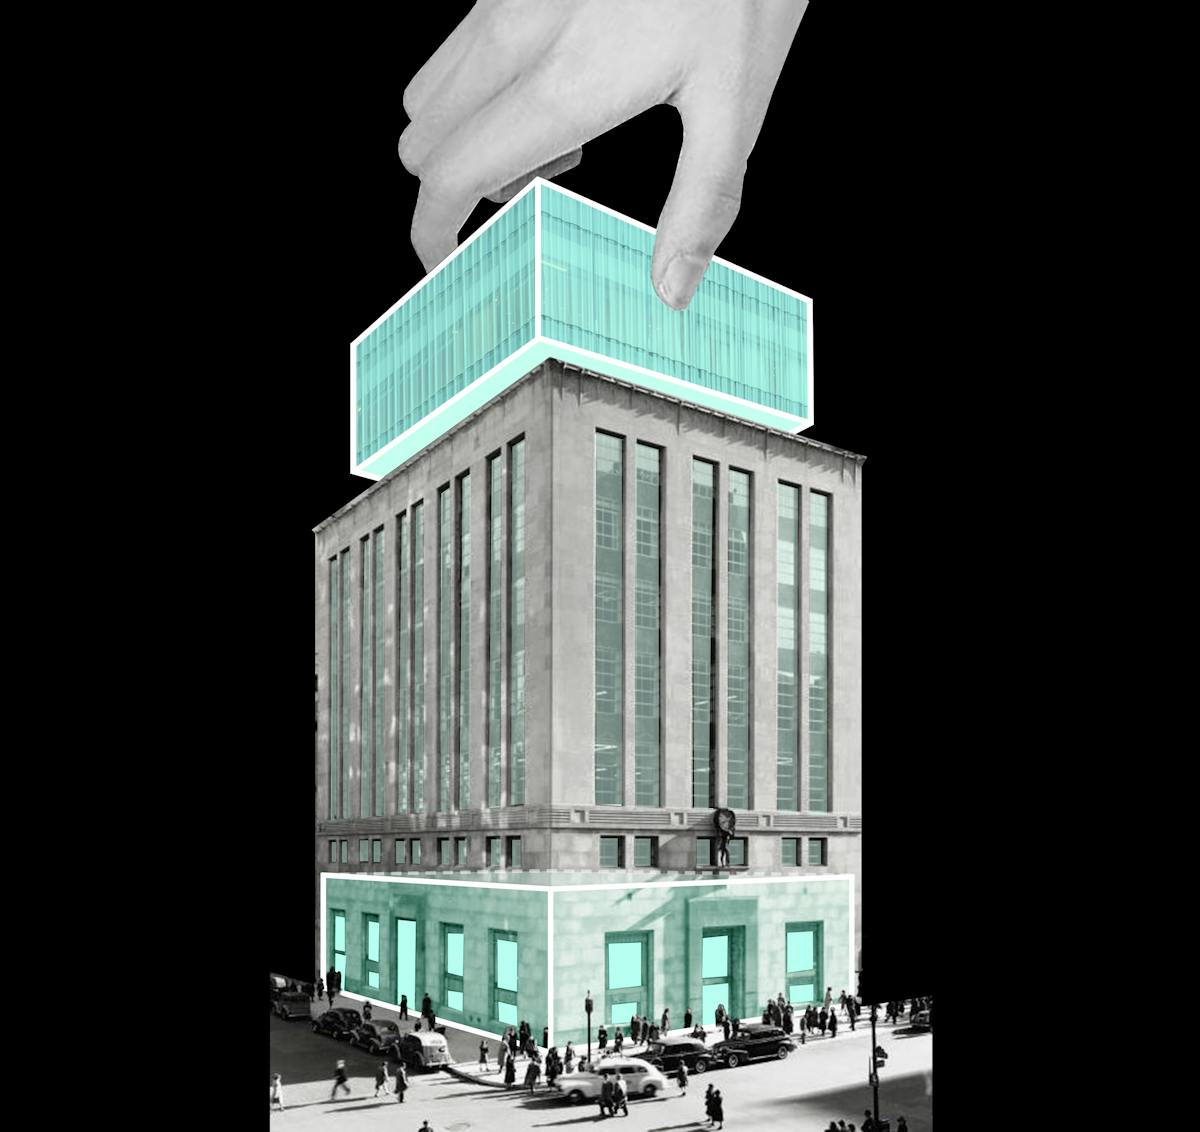 For Tiffany & Co., a Rooftop Addition Wrapped in Glass - The New York Times